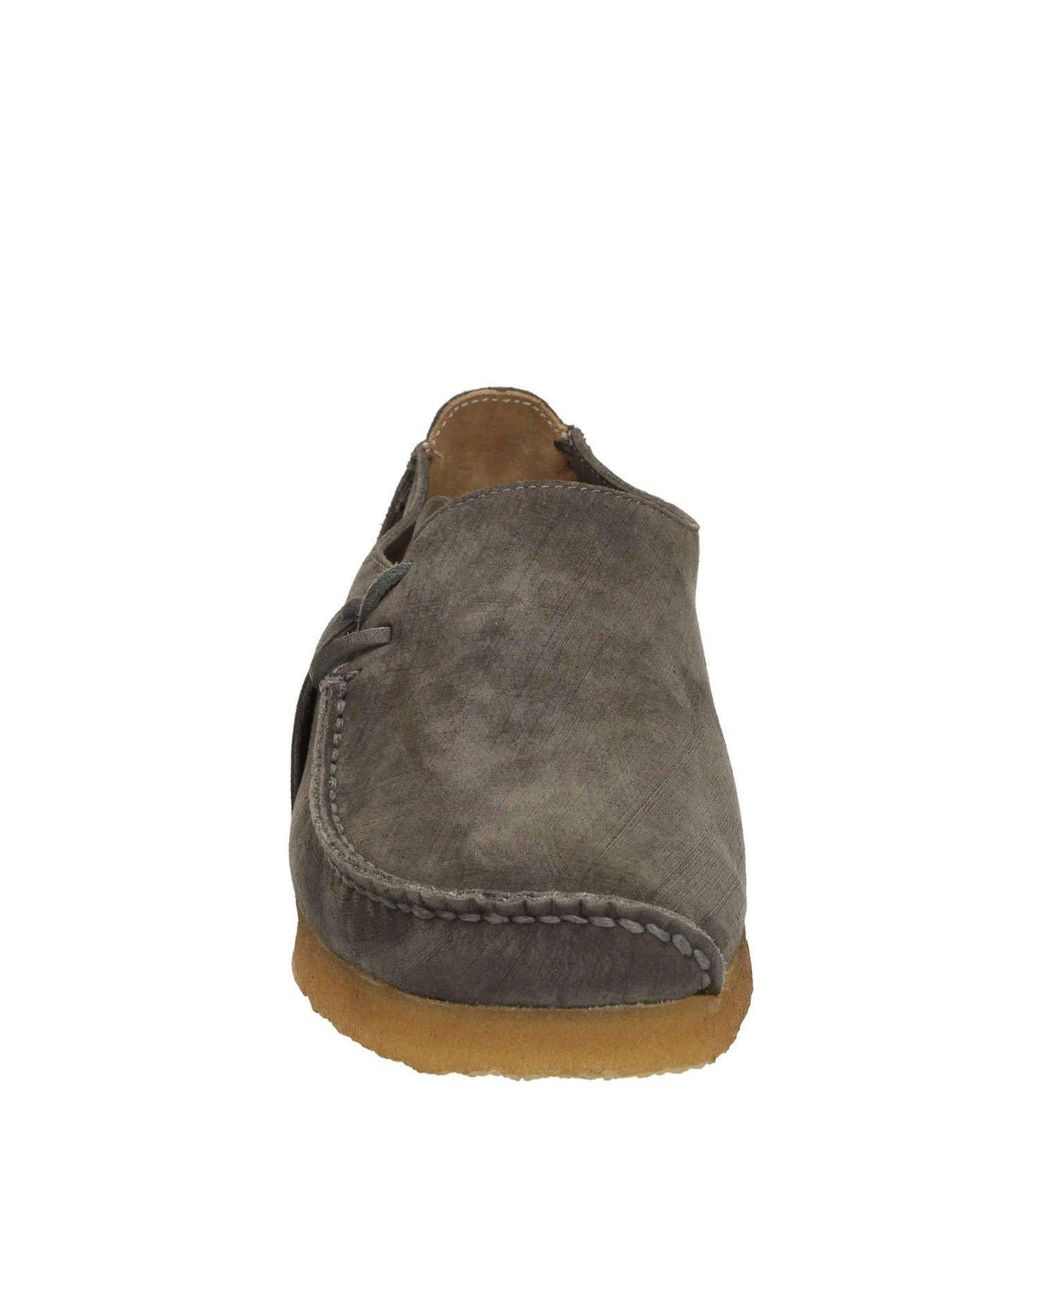 Clarks Lugger Shoe In Charcoal in Gray for Men | Lyst